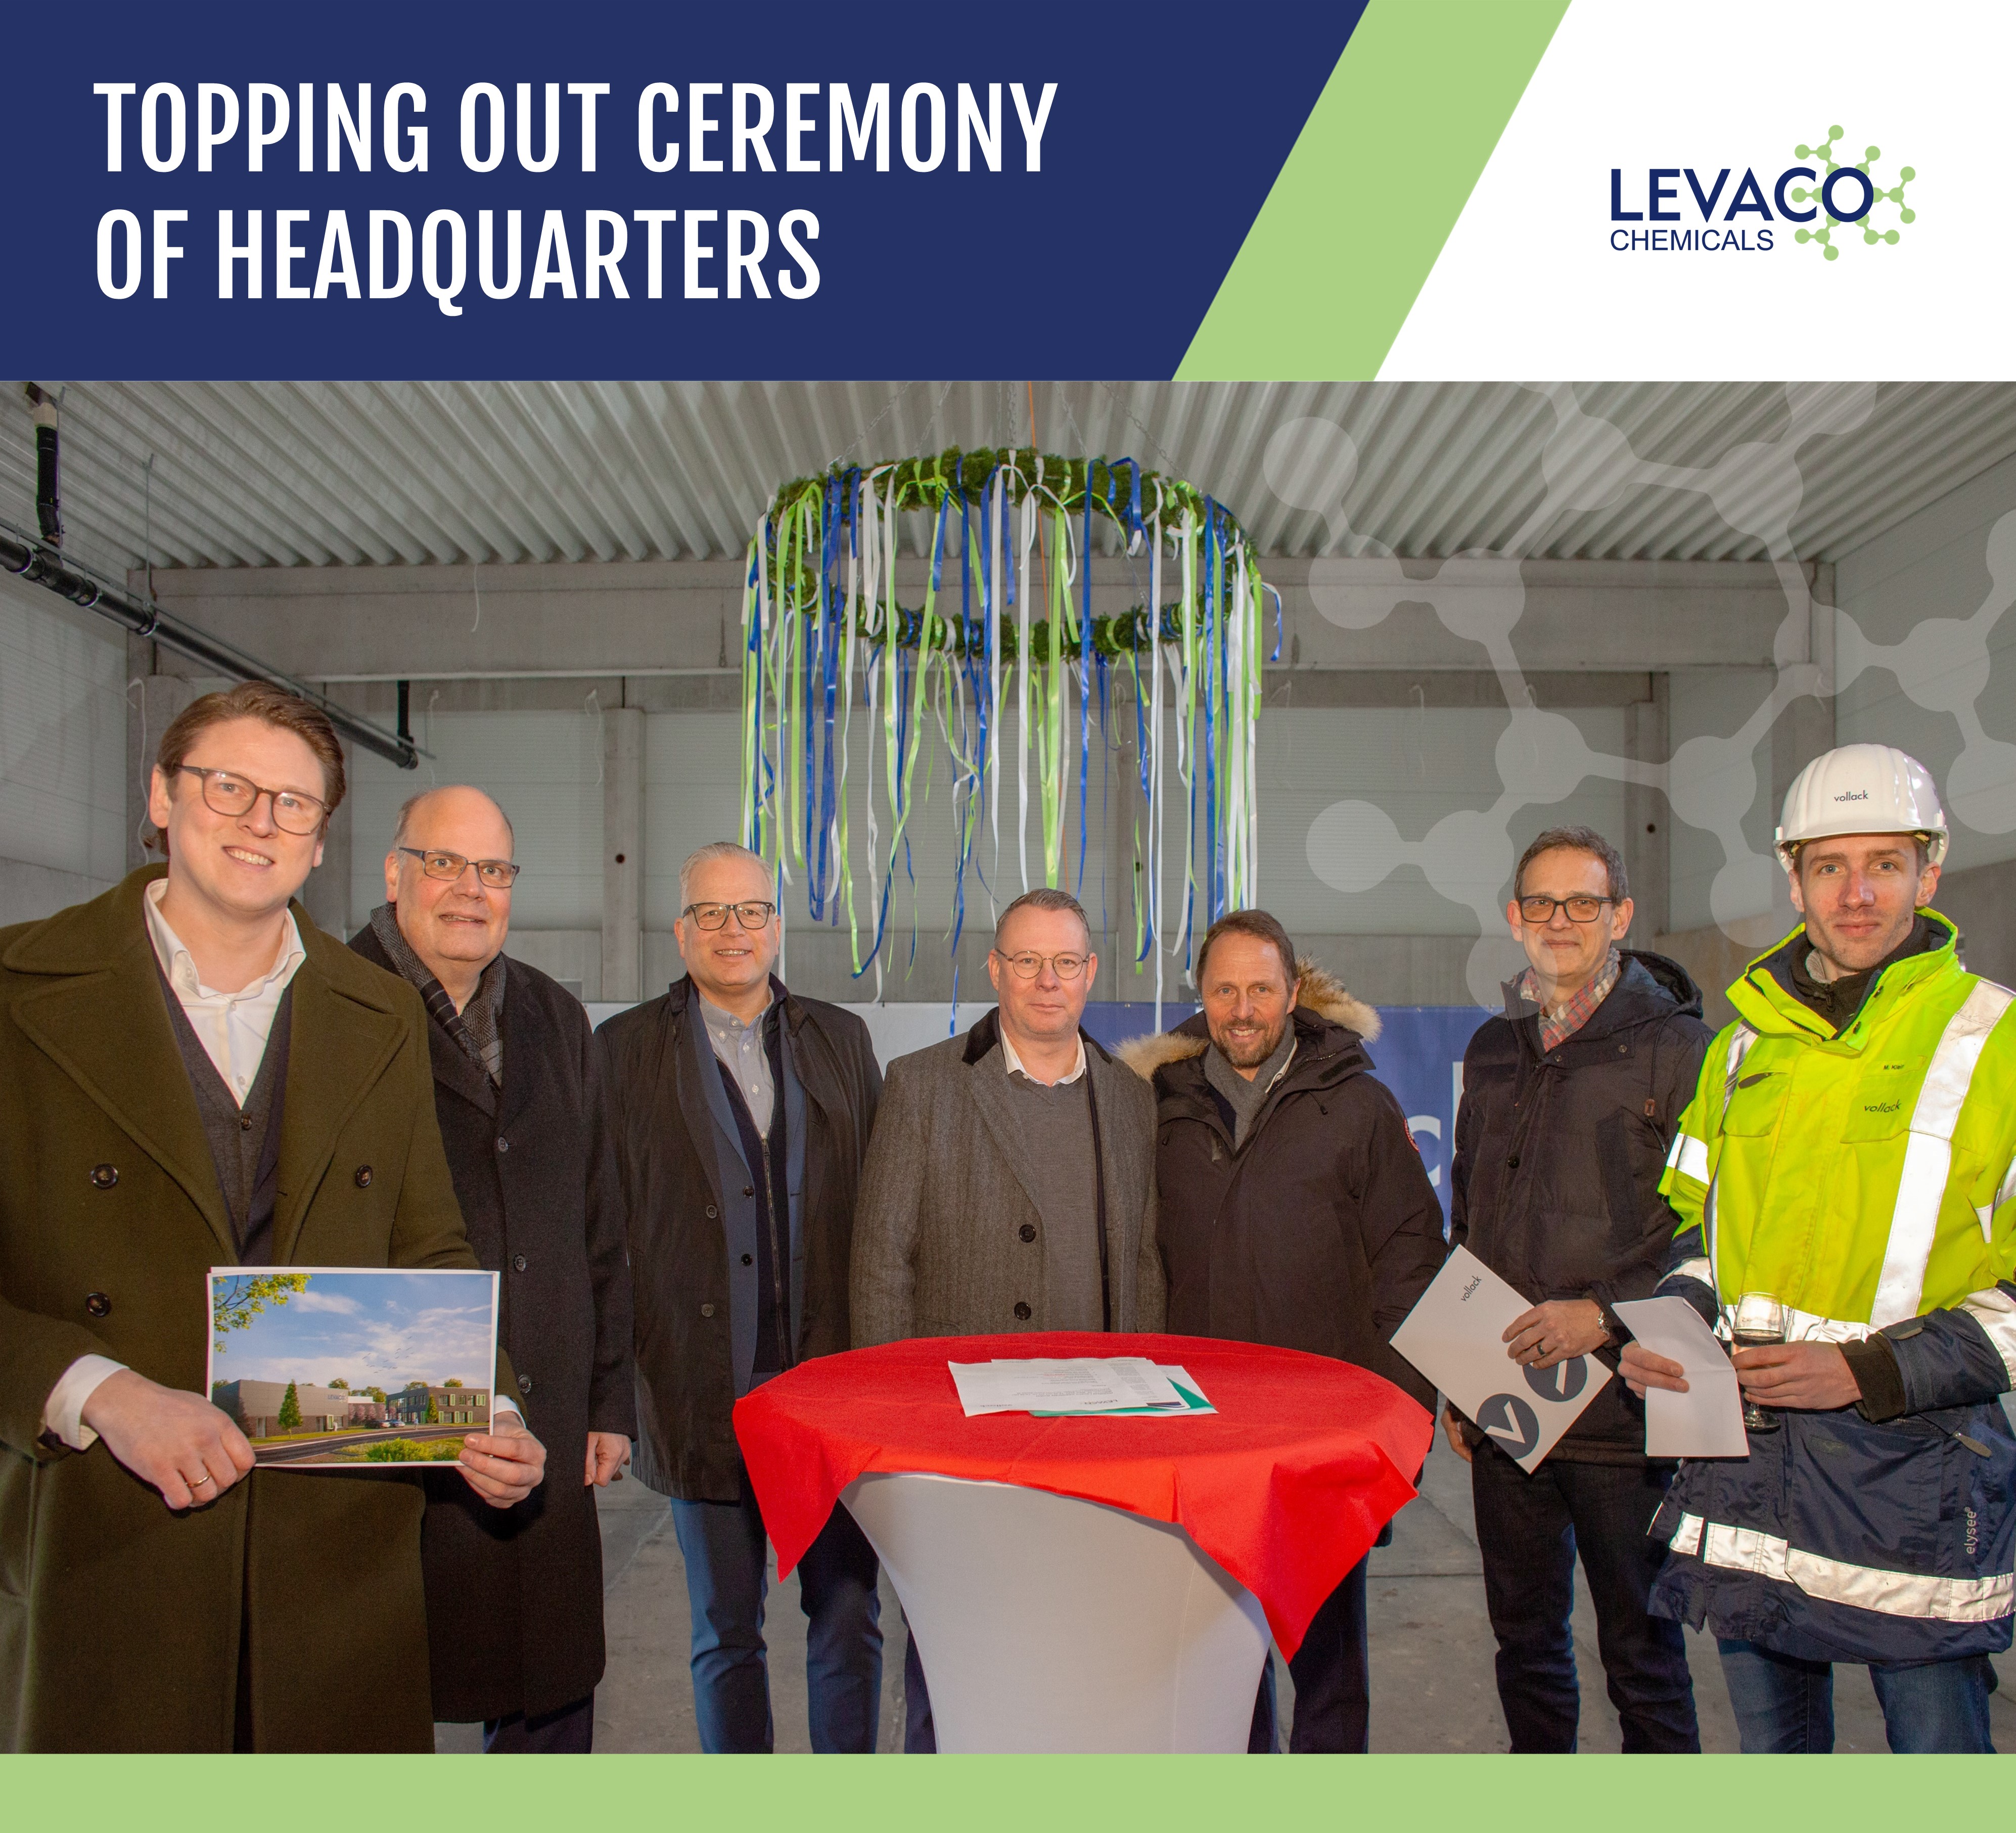 LEVACO celebrates topping-out ceremony of the new headquarter